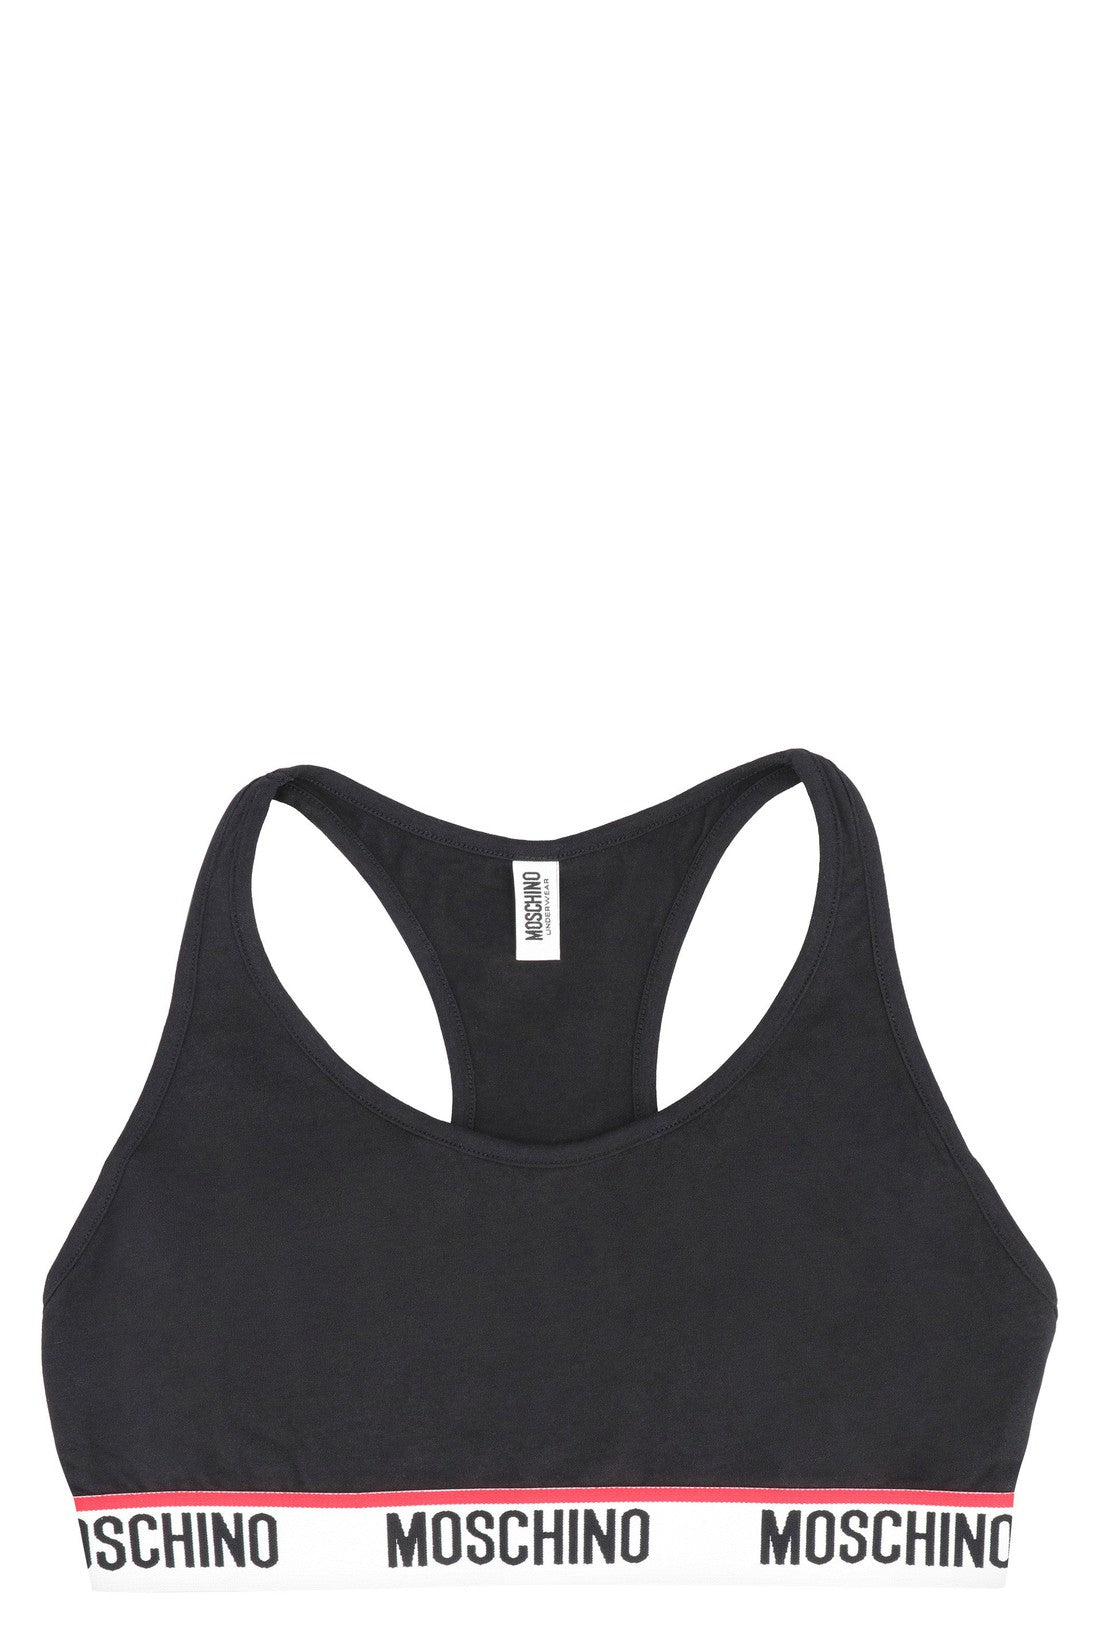 Moschino-OUTLET-SALE-Logo-band bra top-ARCHIVIST